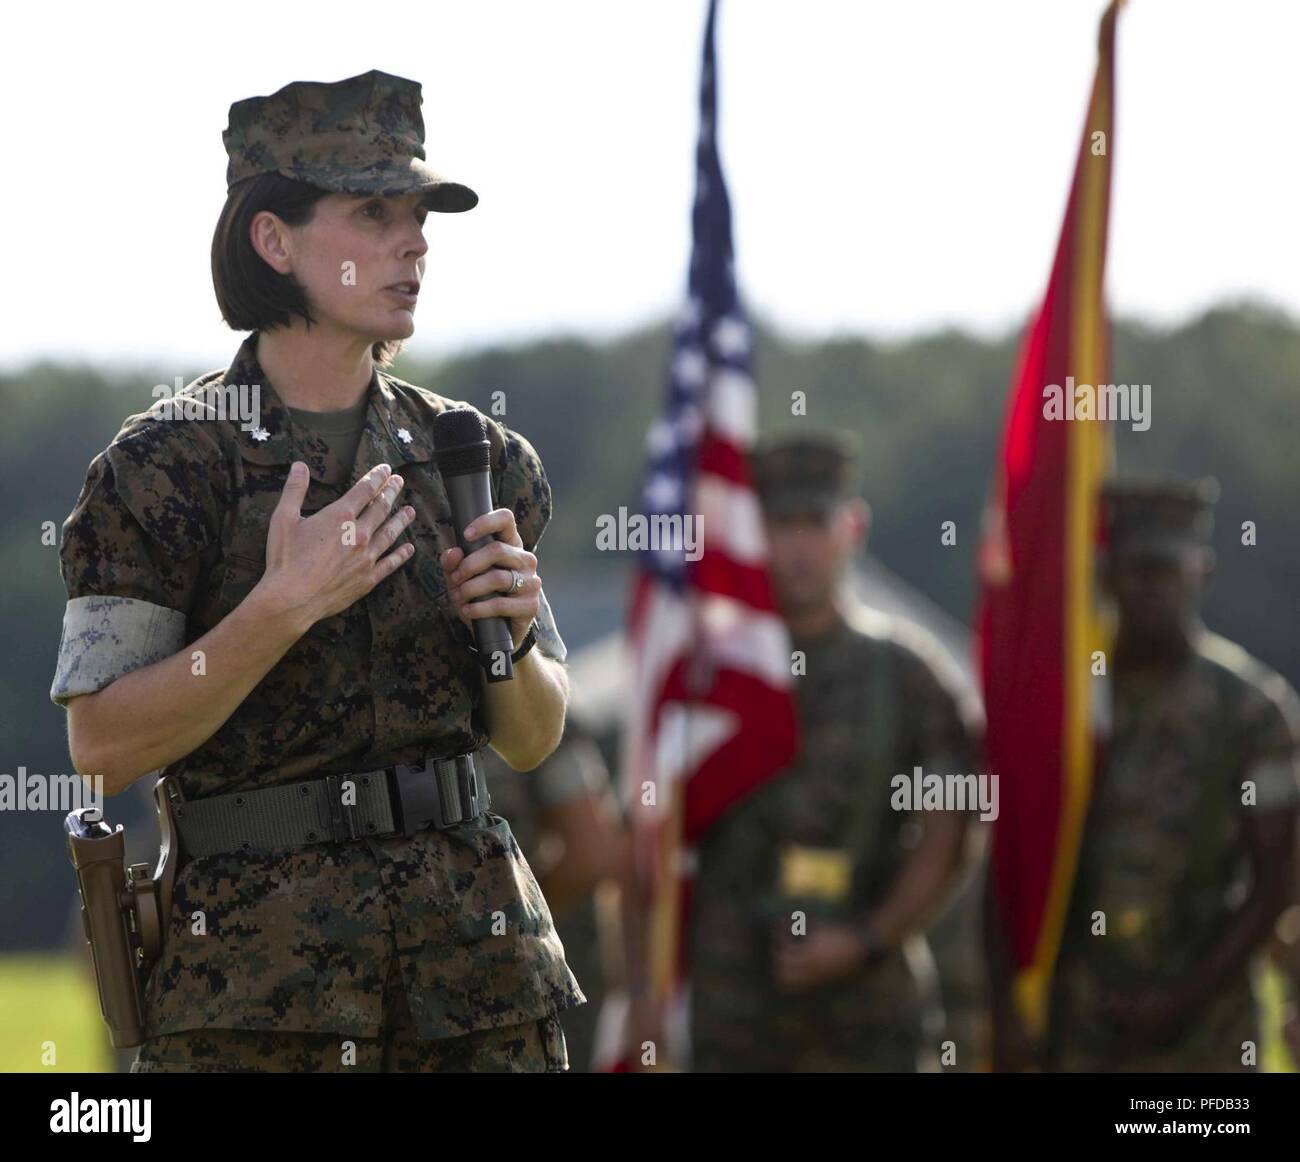 U.S. Marine Lt. Col. Amy E. Punzel the on coming commanding officer of Headquarters and Service (H&S) Battalion, School of Infantry-East, addresses Marines, Sailors, family and friends during the H&S Battalion change of command ceremony at Camp Lejeune, N.C., June 8, 2018. The change of command ceremony represents the offical passing of authority from the off going commander, Lt.Col. Kyle G. Phillips to the on coming, Lt. Col. Punzel. Stock Photo